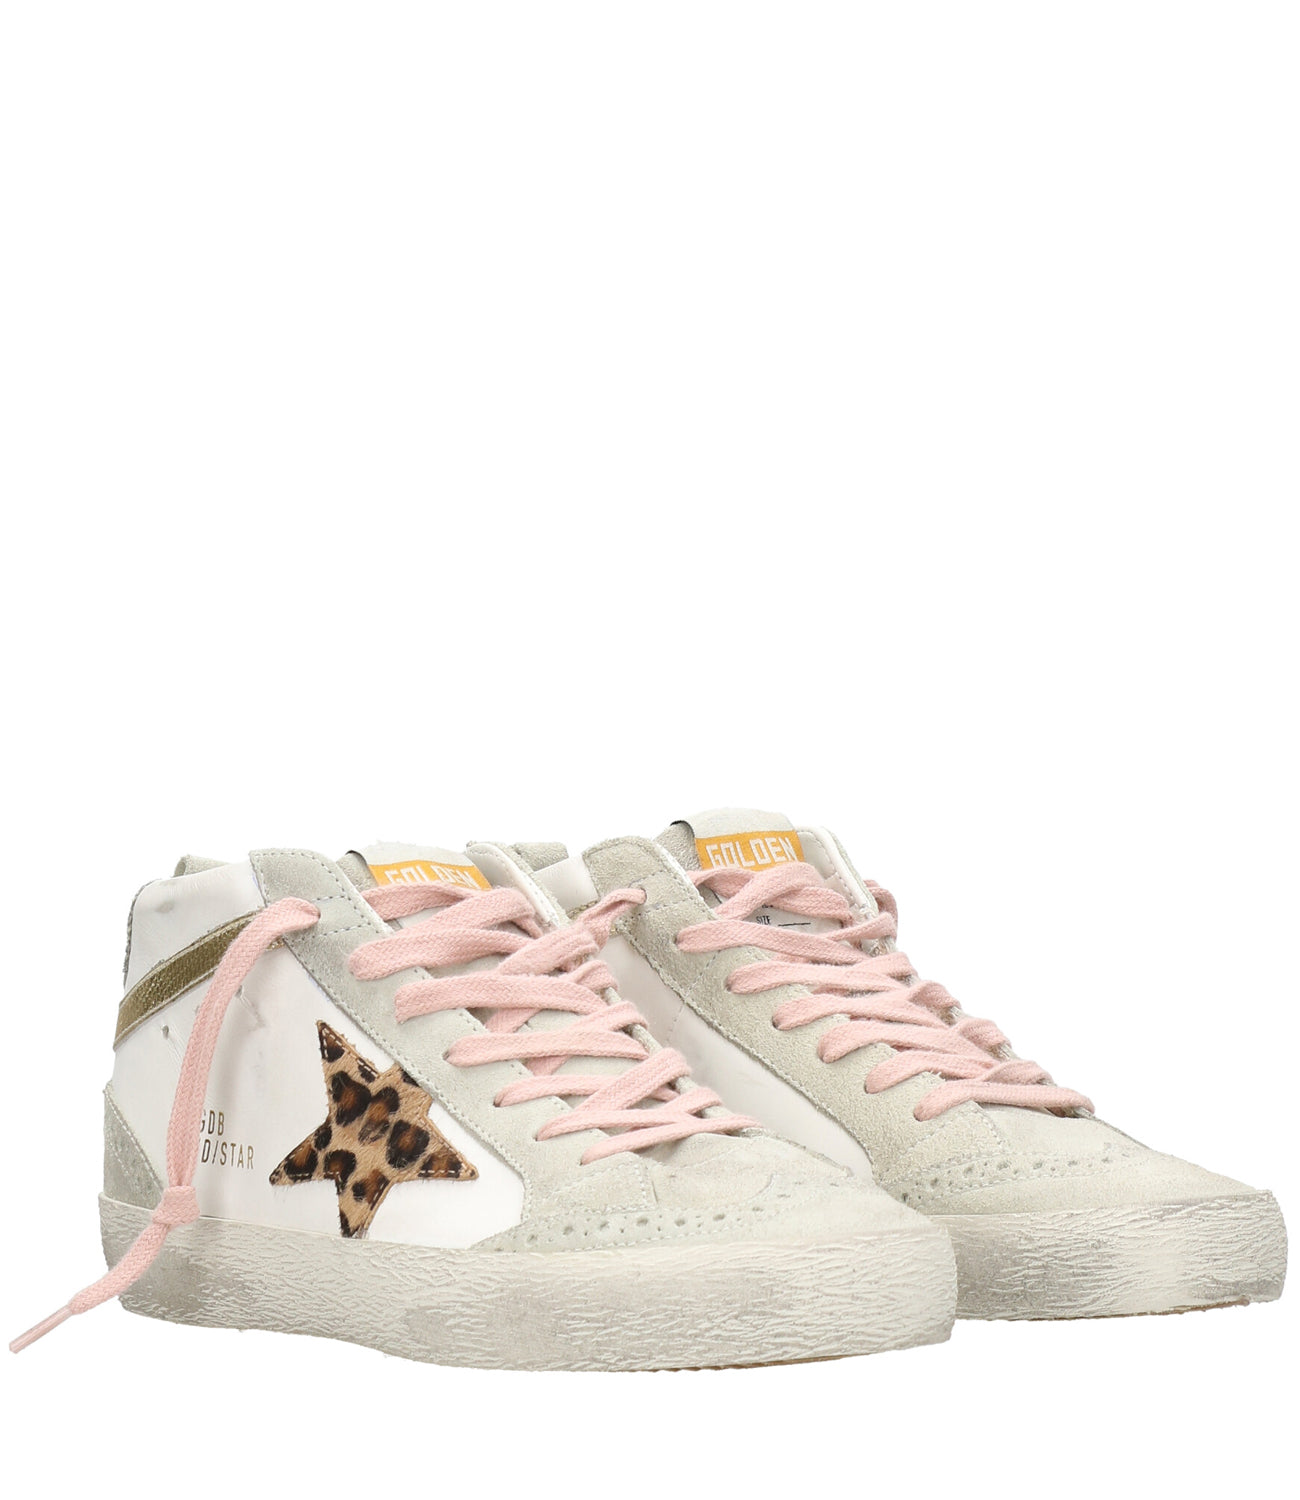 Golden Goose | Mid Star Sneaker White and Silver